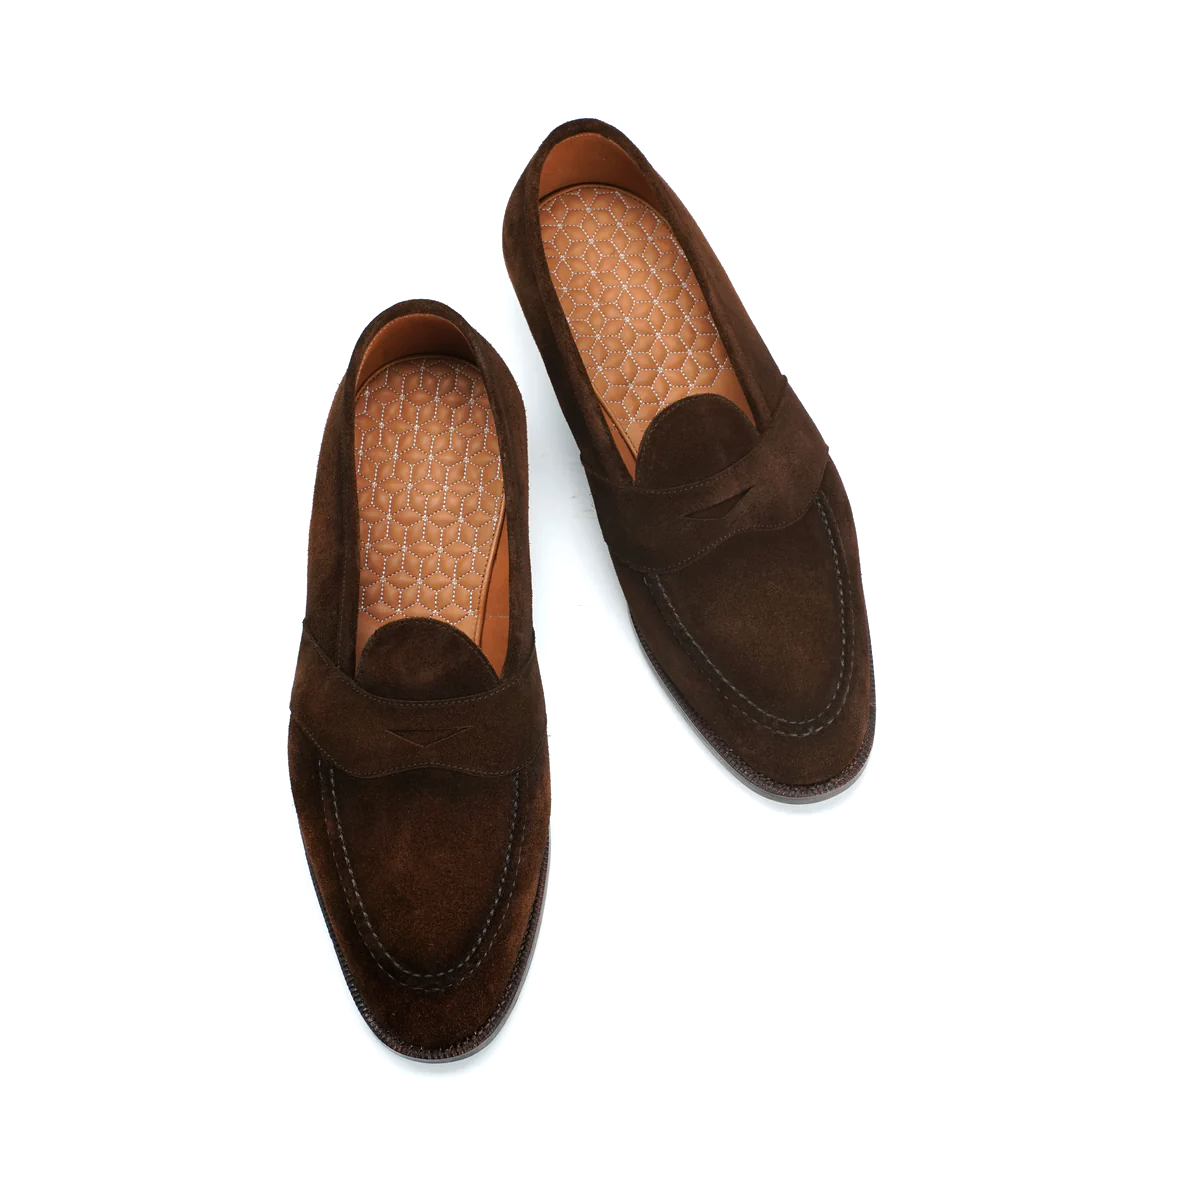 Lula Dudley Loafers